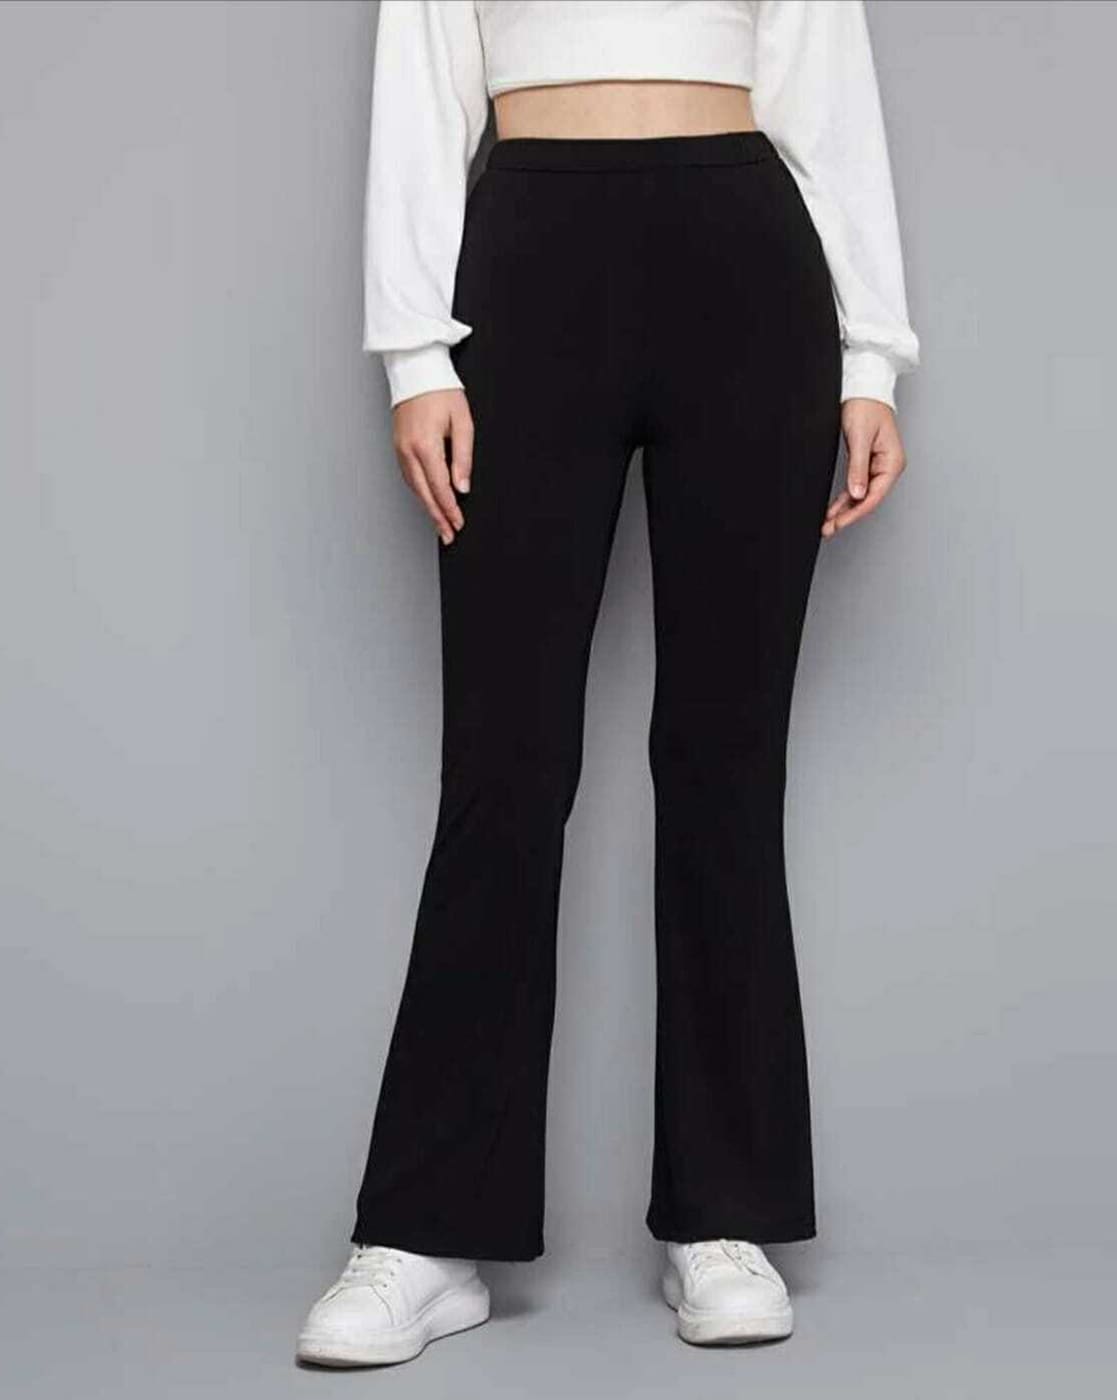 BDG Black Corduroy Flare Pant | Urban Outfitters